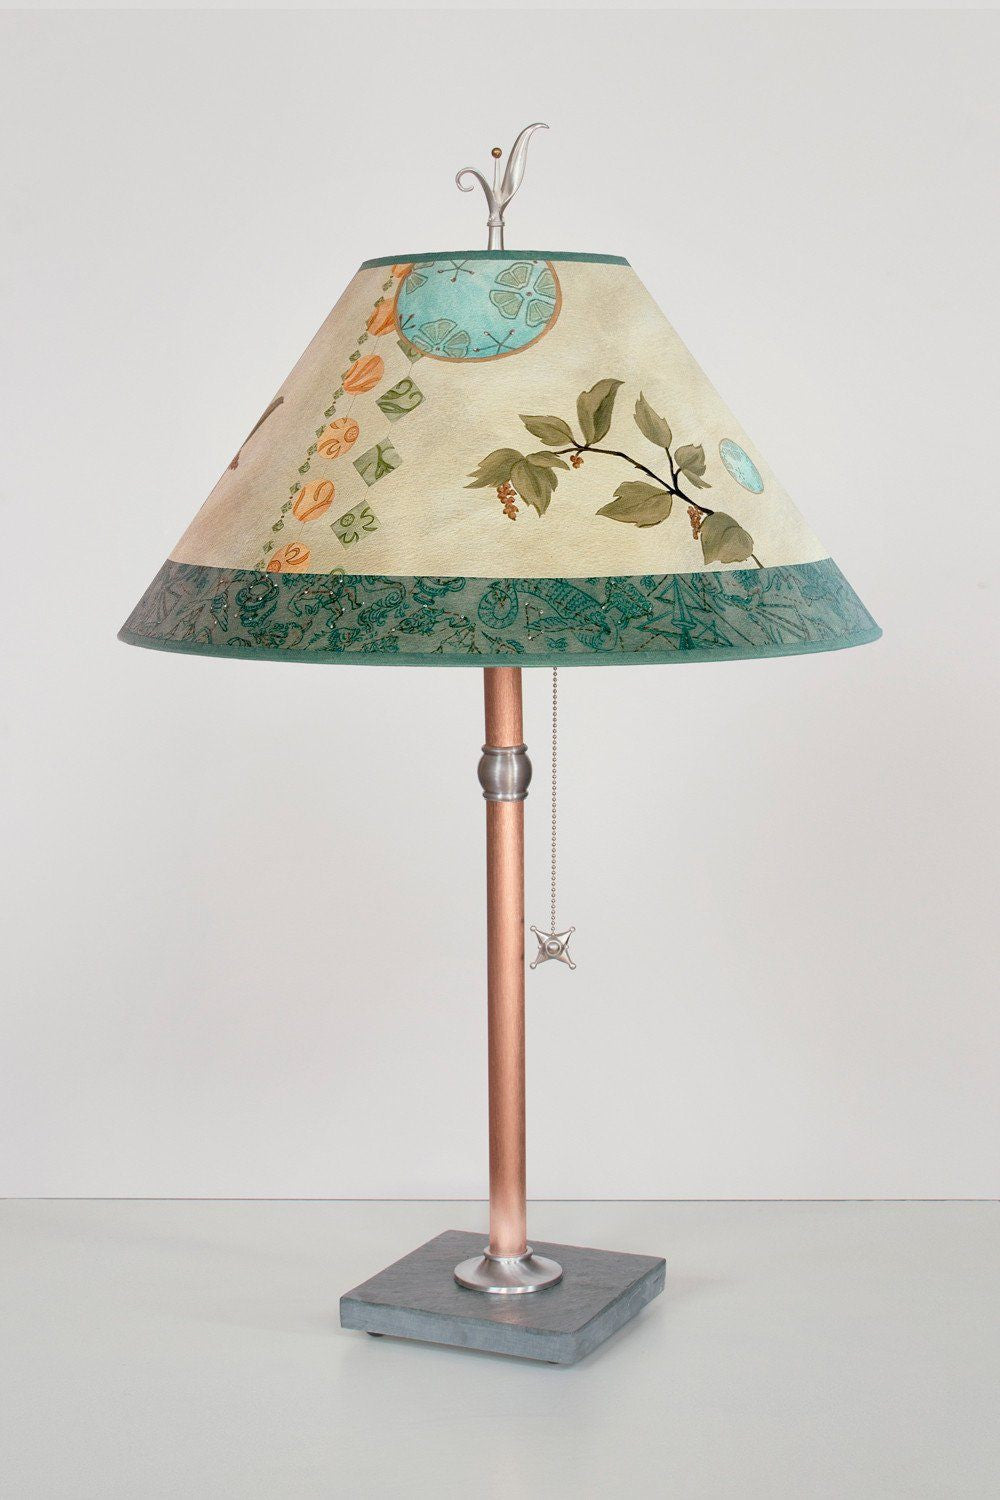 Celestial Leaf large conical copper table lamp